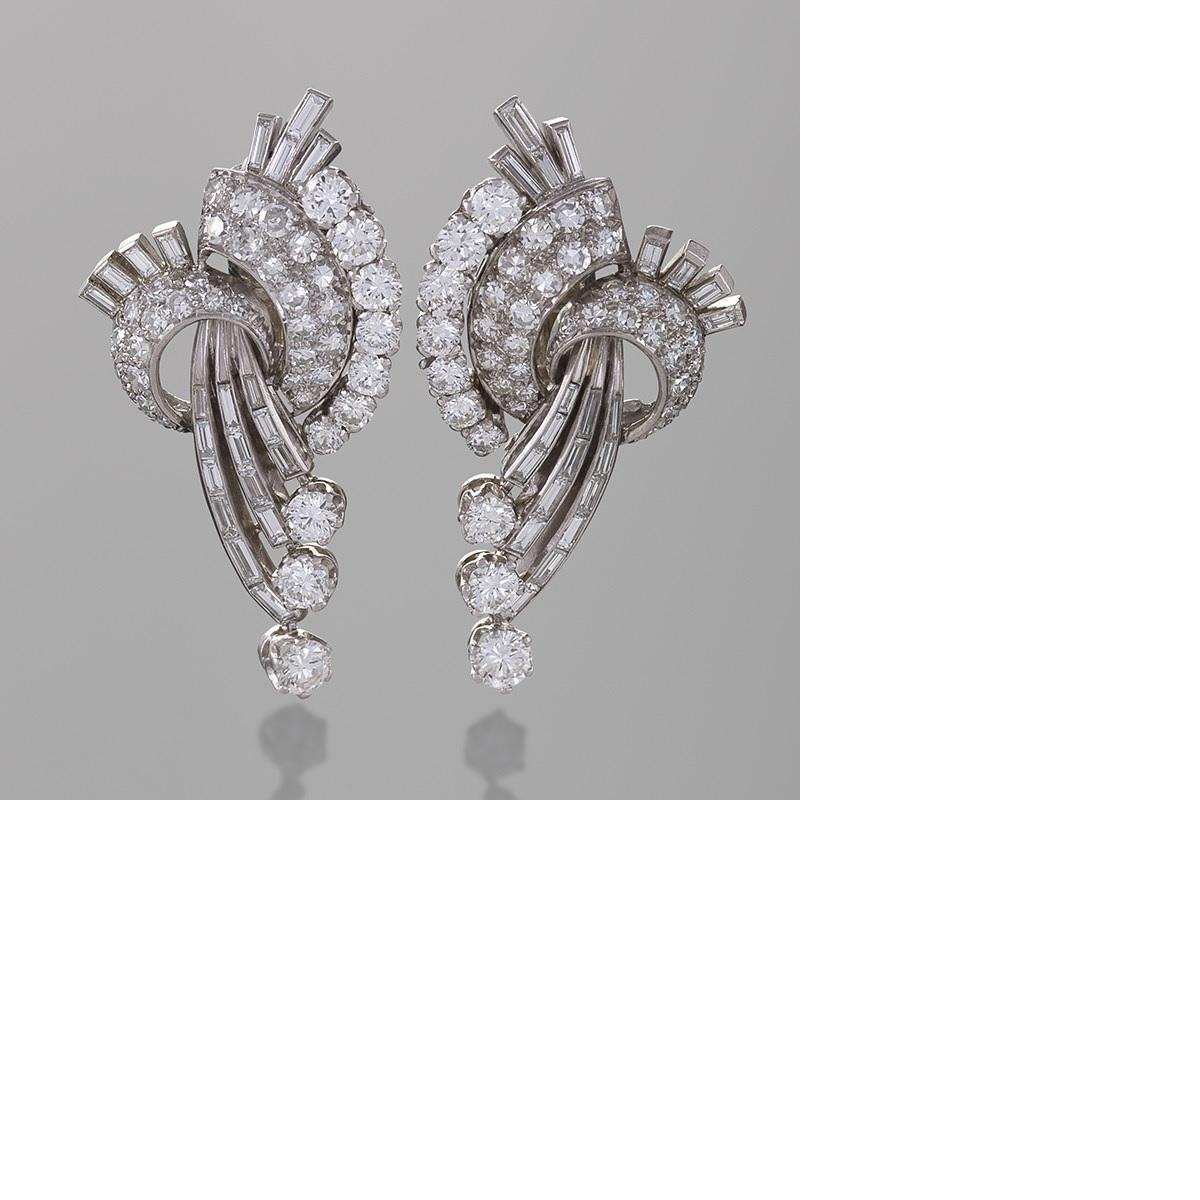 A pair of French Mid-20th Century platinum earrings with diamonds. The earrings have 82 round-cut diamonds with an approximate total weight of 4.20 carats, and 48 baguette diamonds with an approximate total weight of 3.00 carats, H/I color, VS